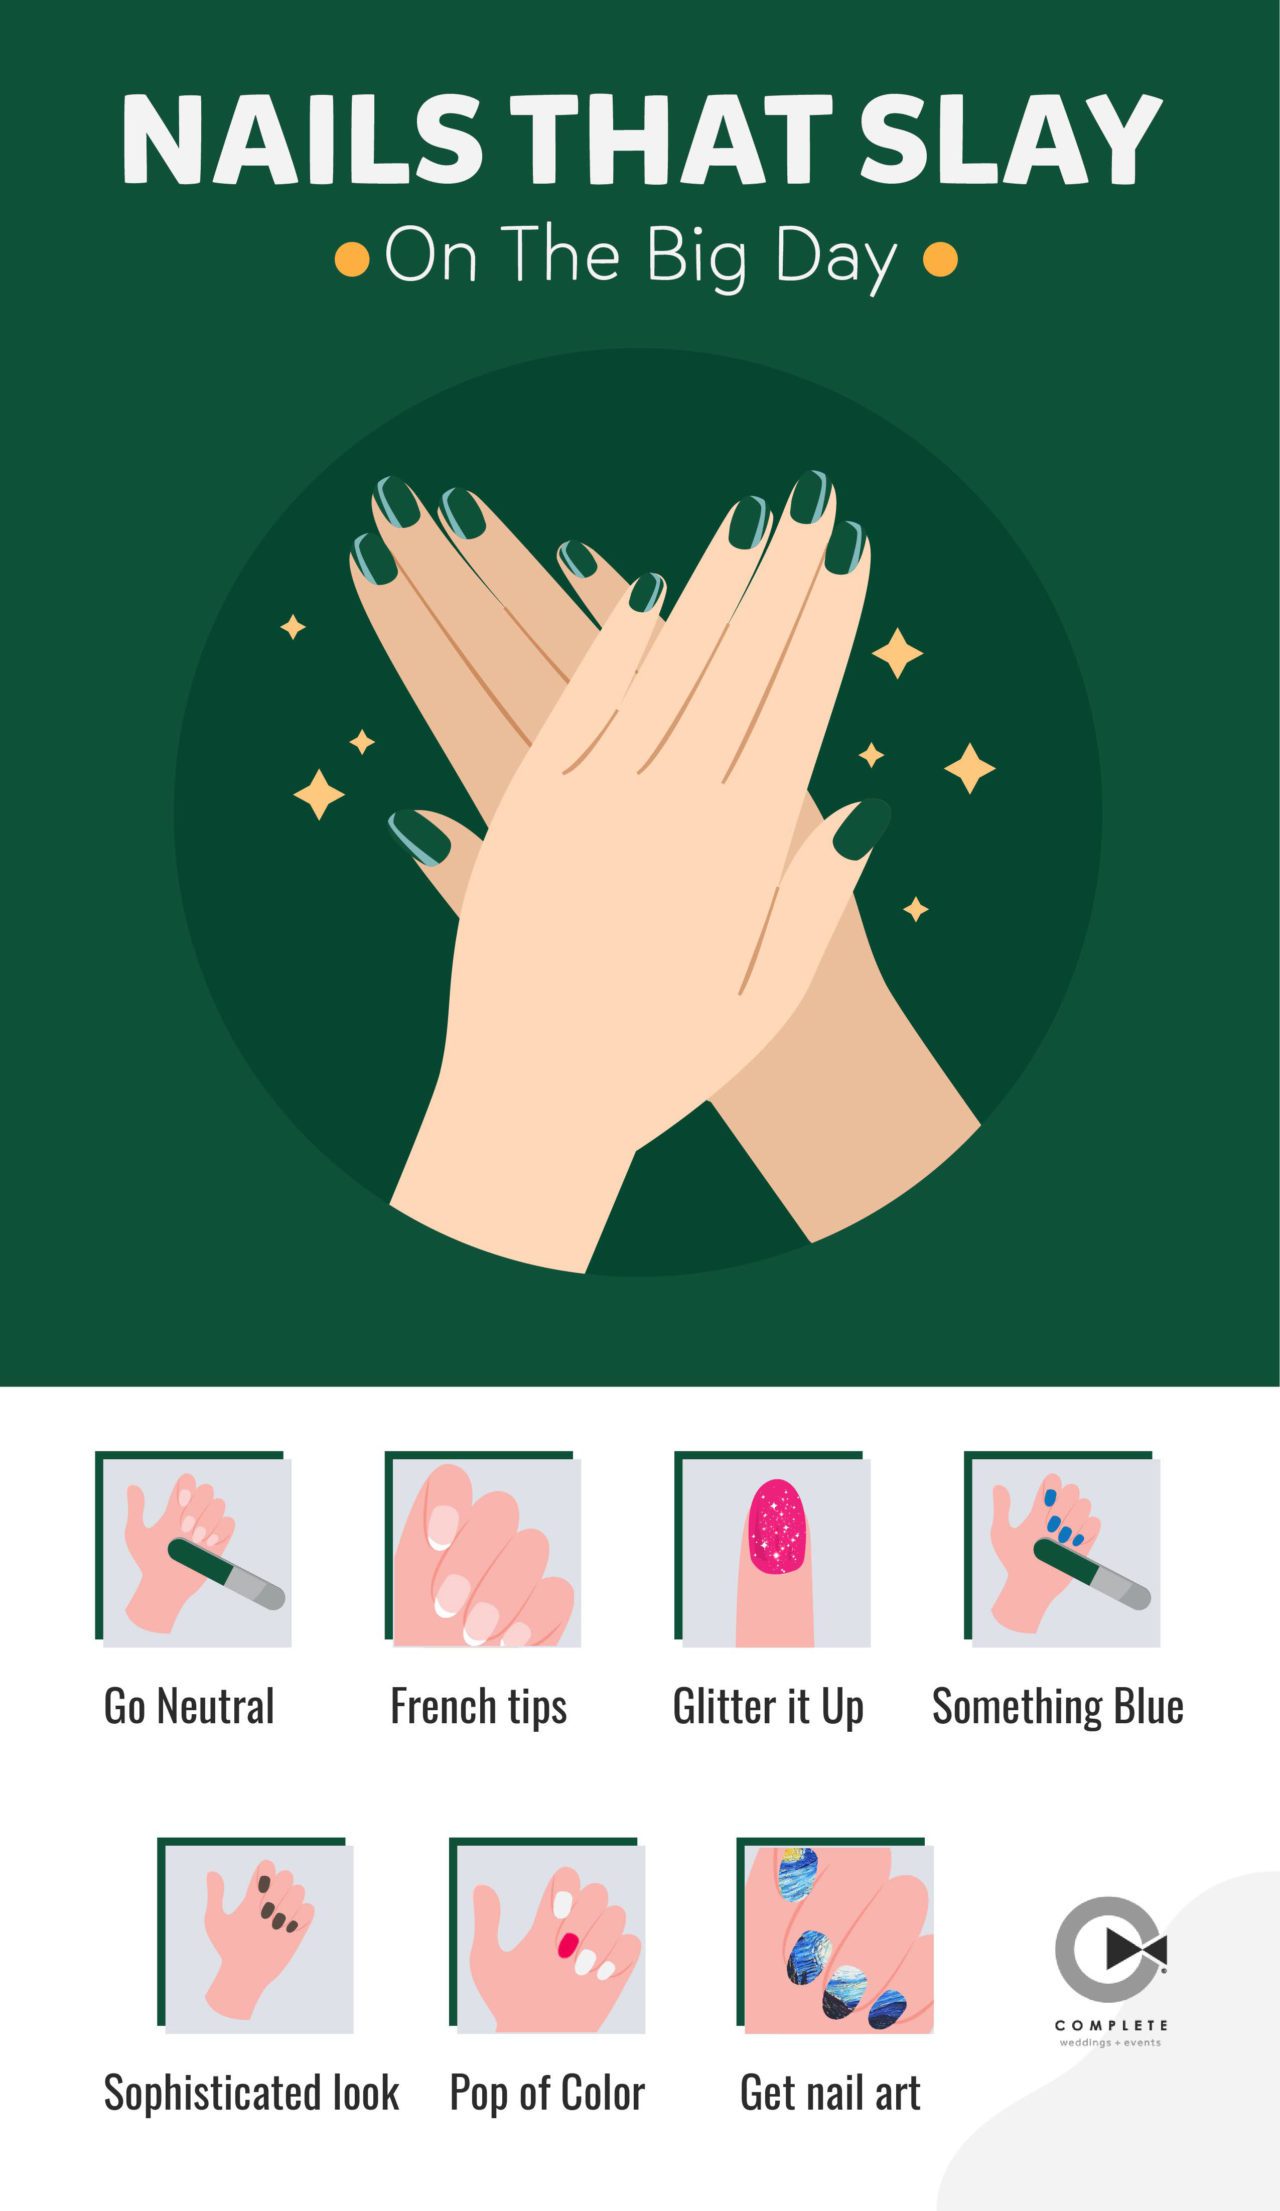 Nails that slay on your Big Day infographic